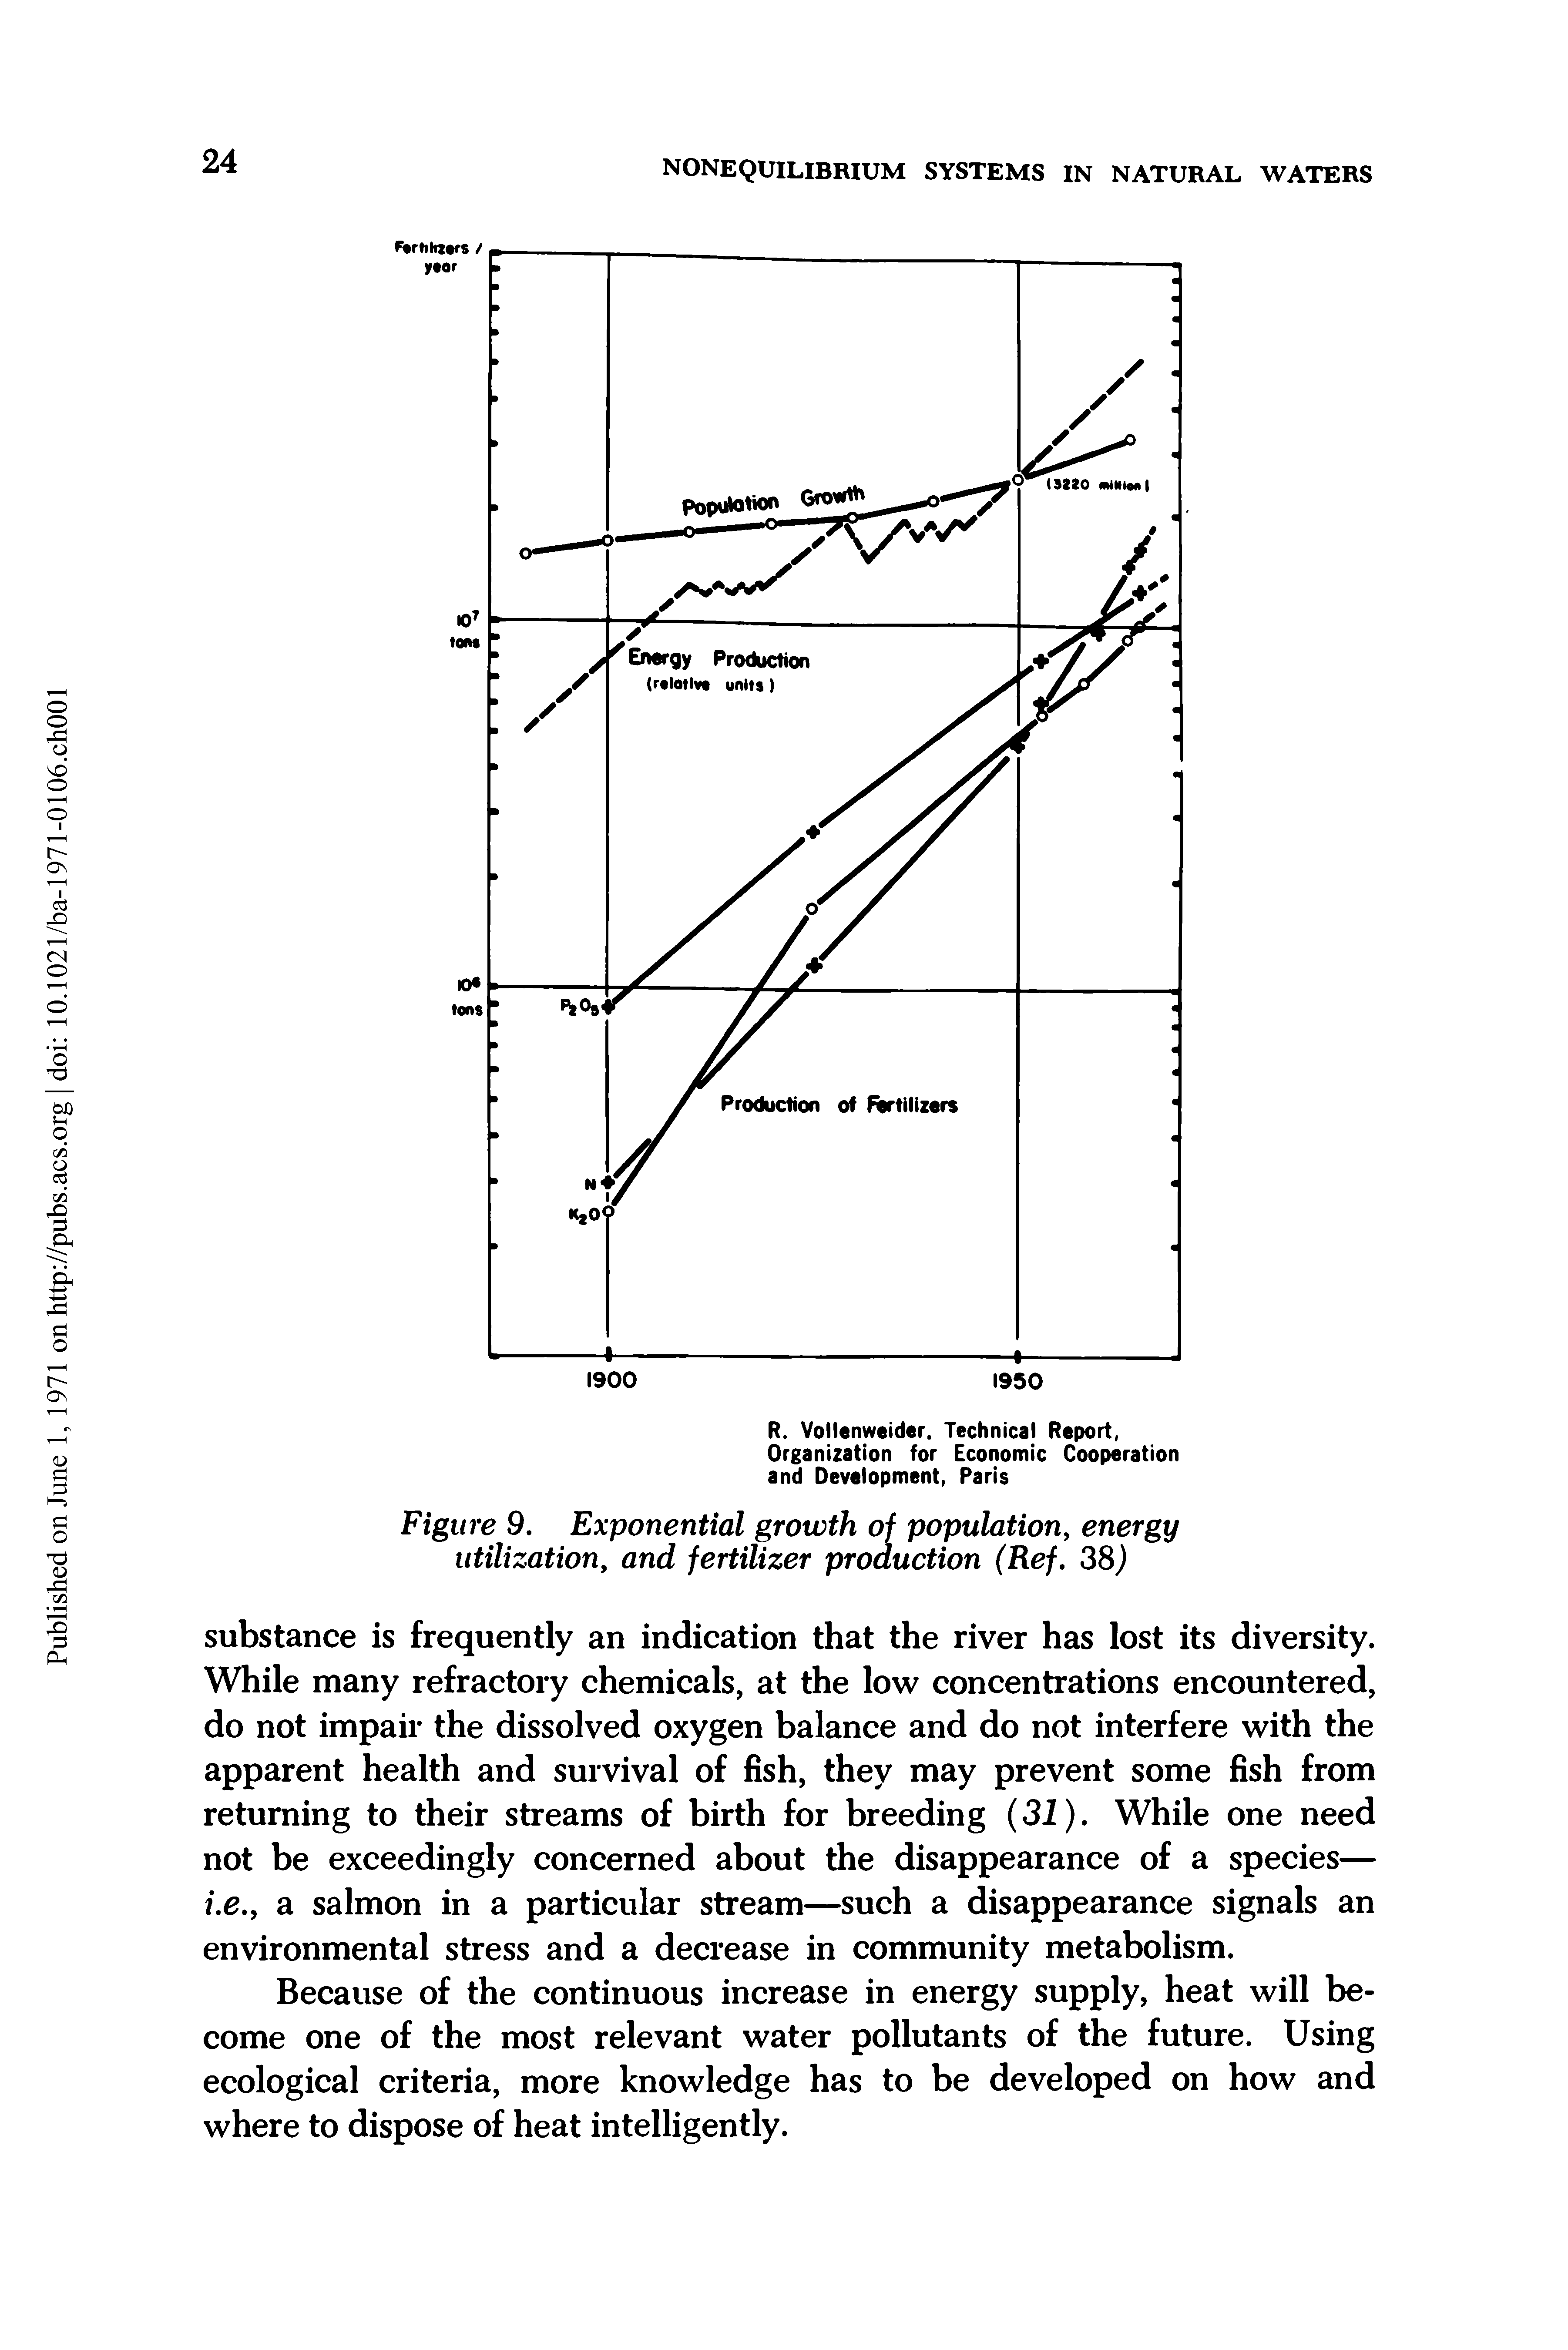 Figure 9. Exponential growth of population, energy utilization, and fertilizer production (Ref. 38)...